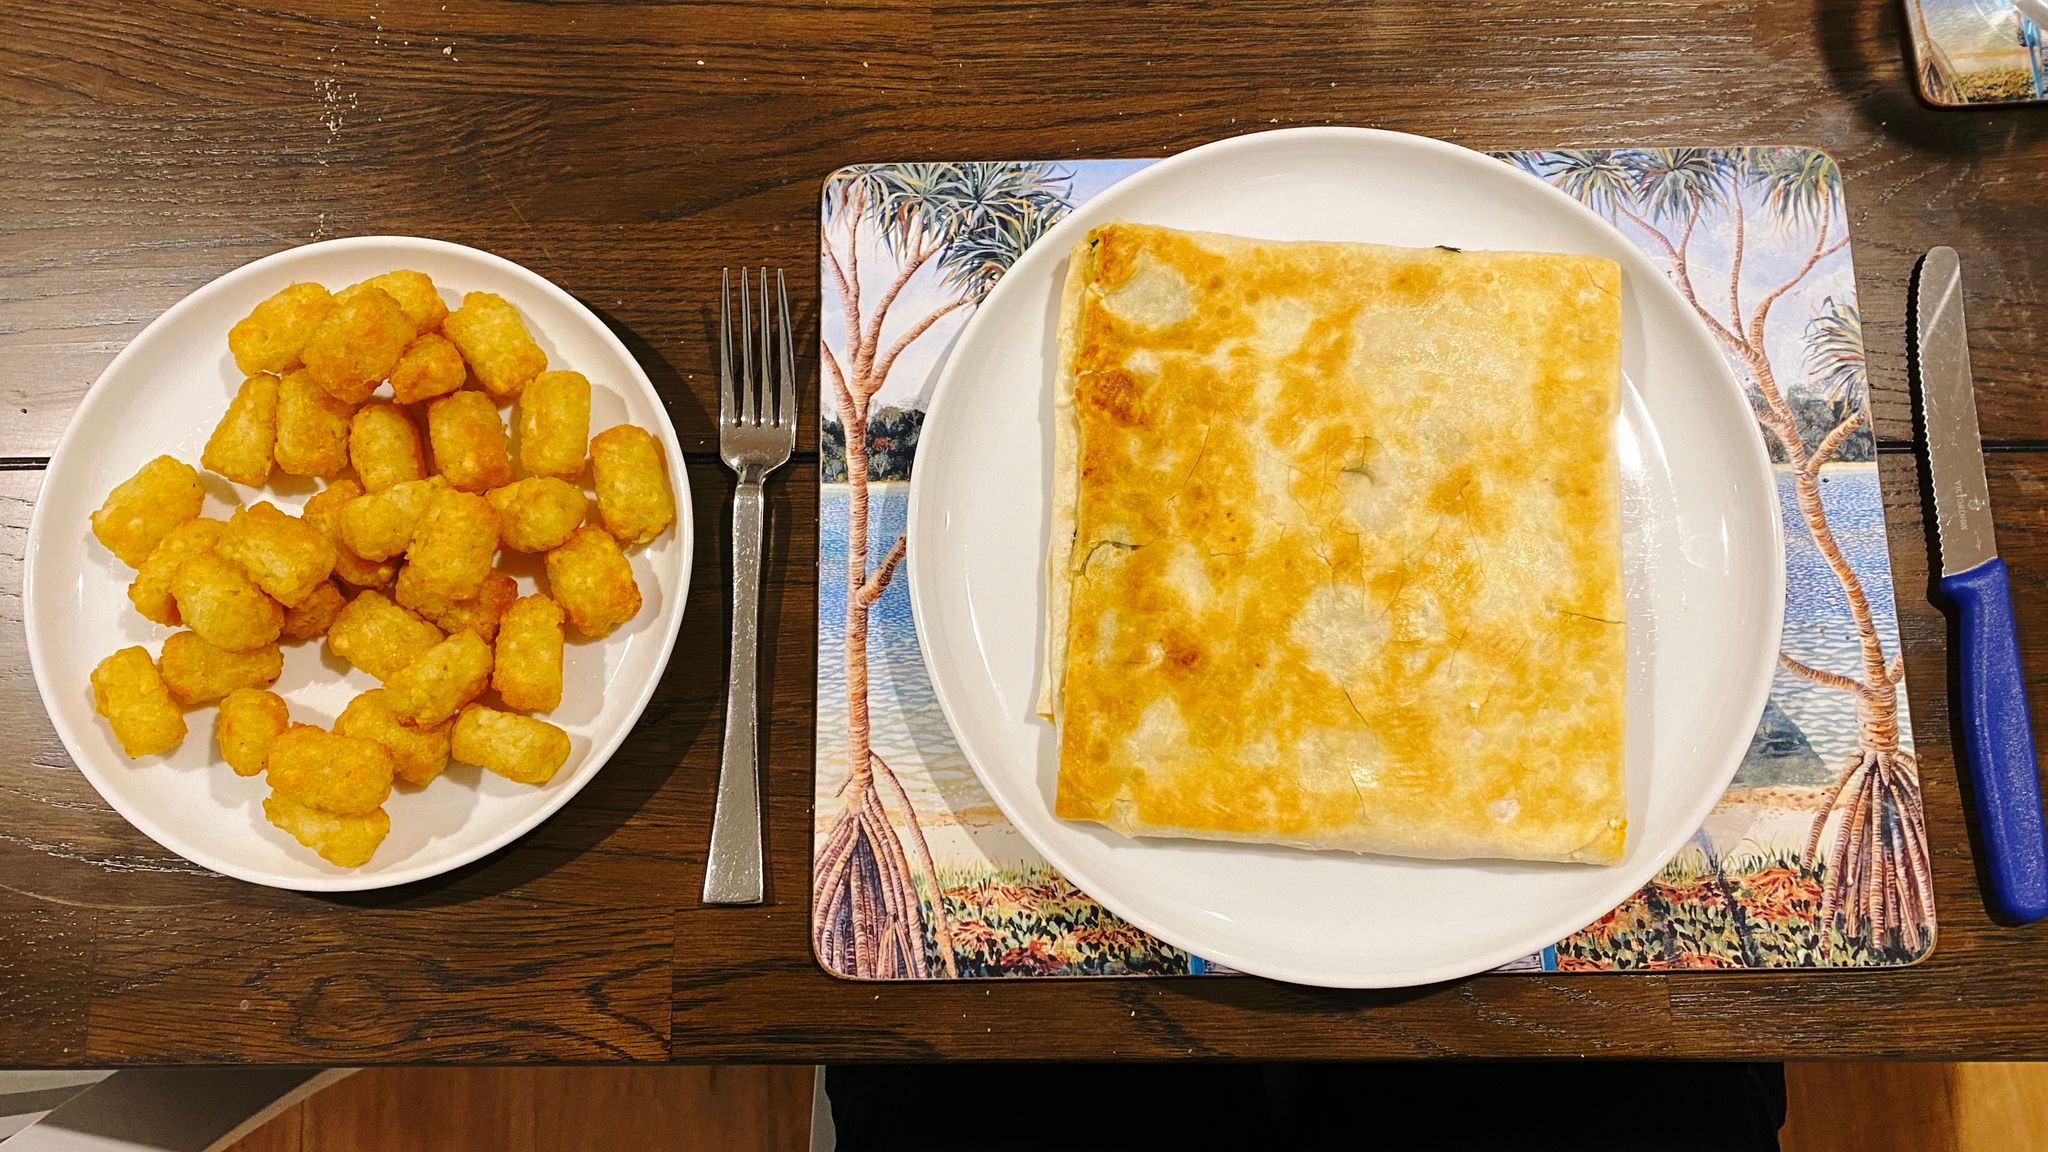 A photo of a dinner plate with a big square gozleme in it, with a small plate next to it filled with potato gems.